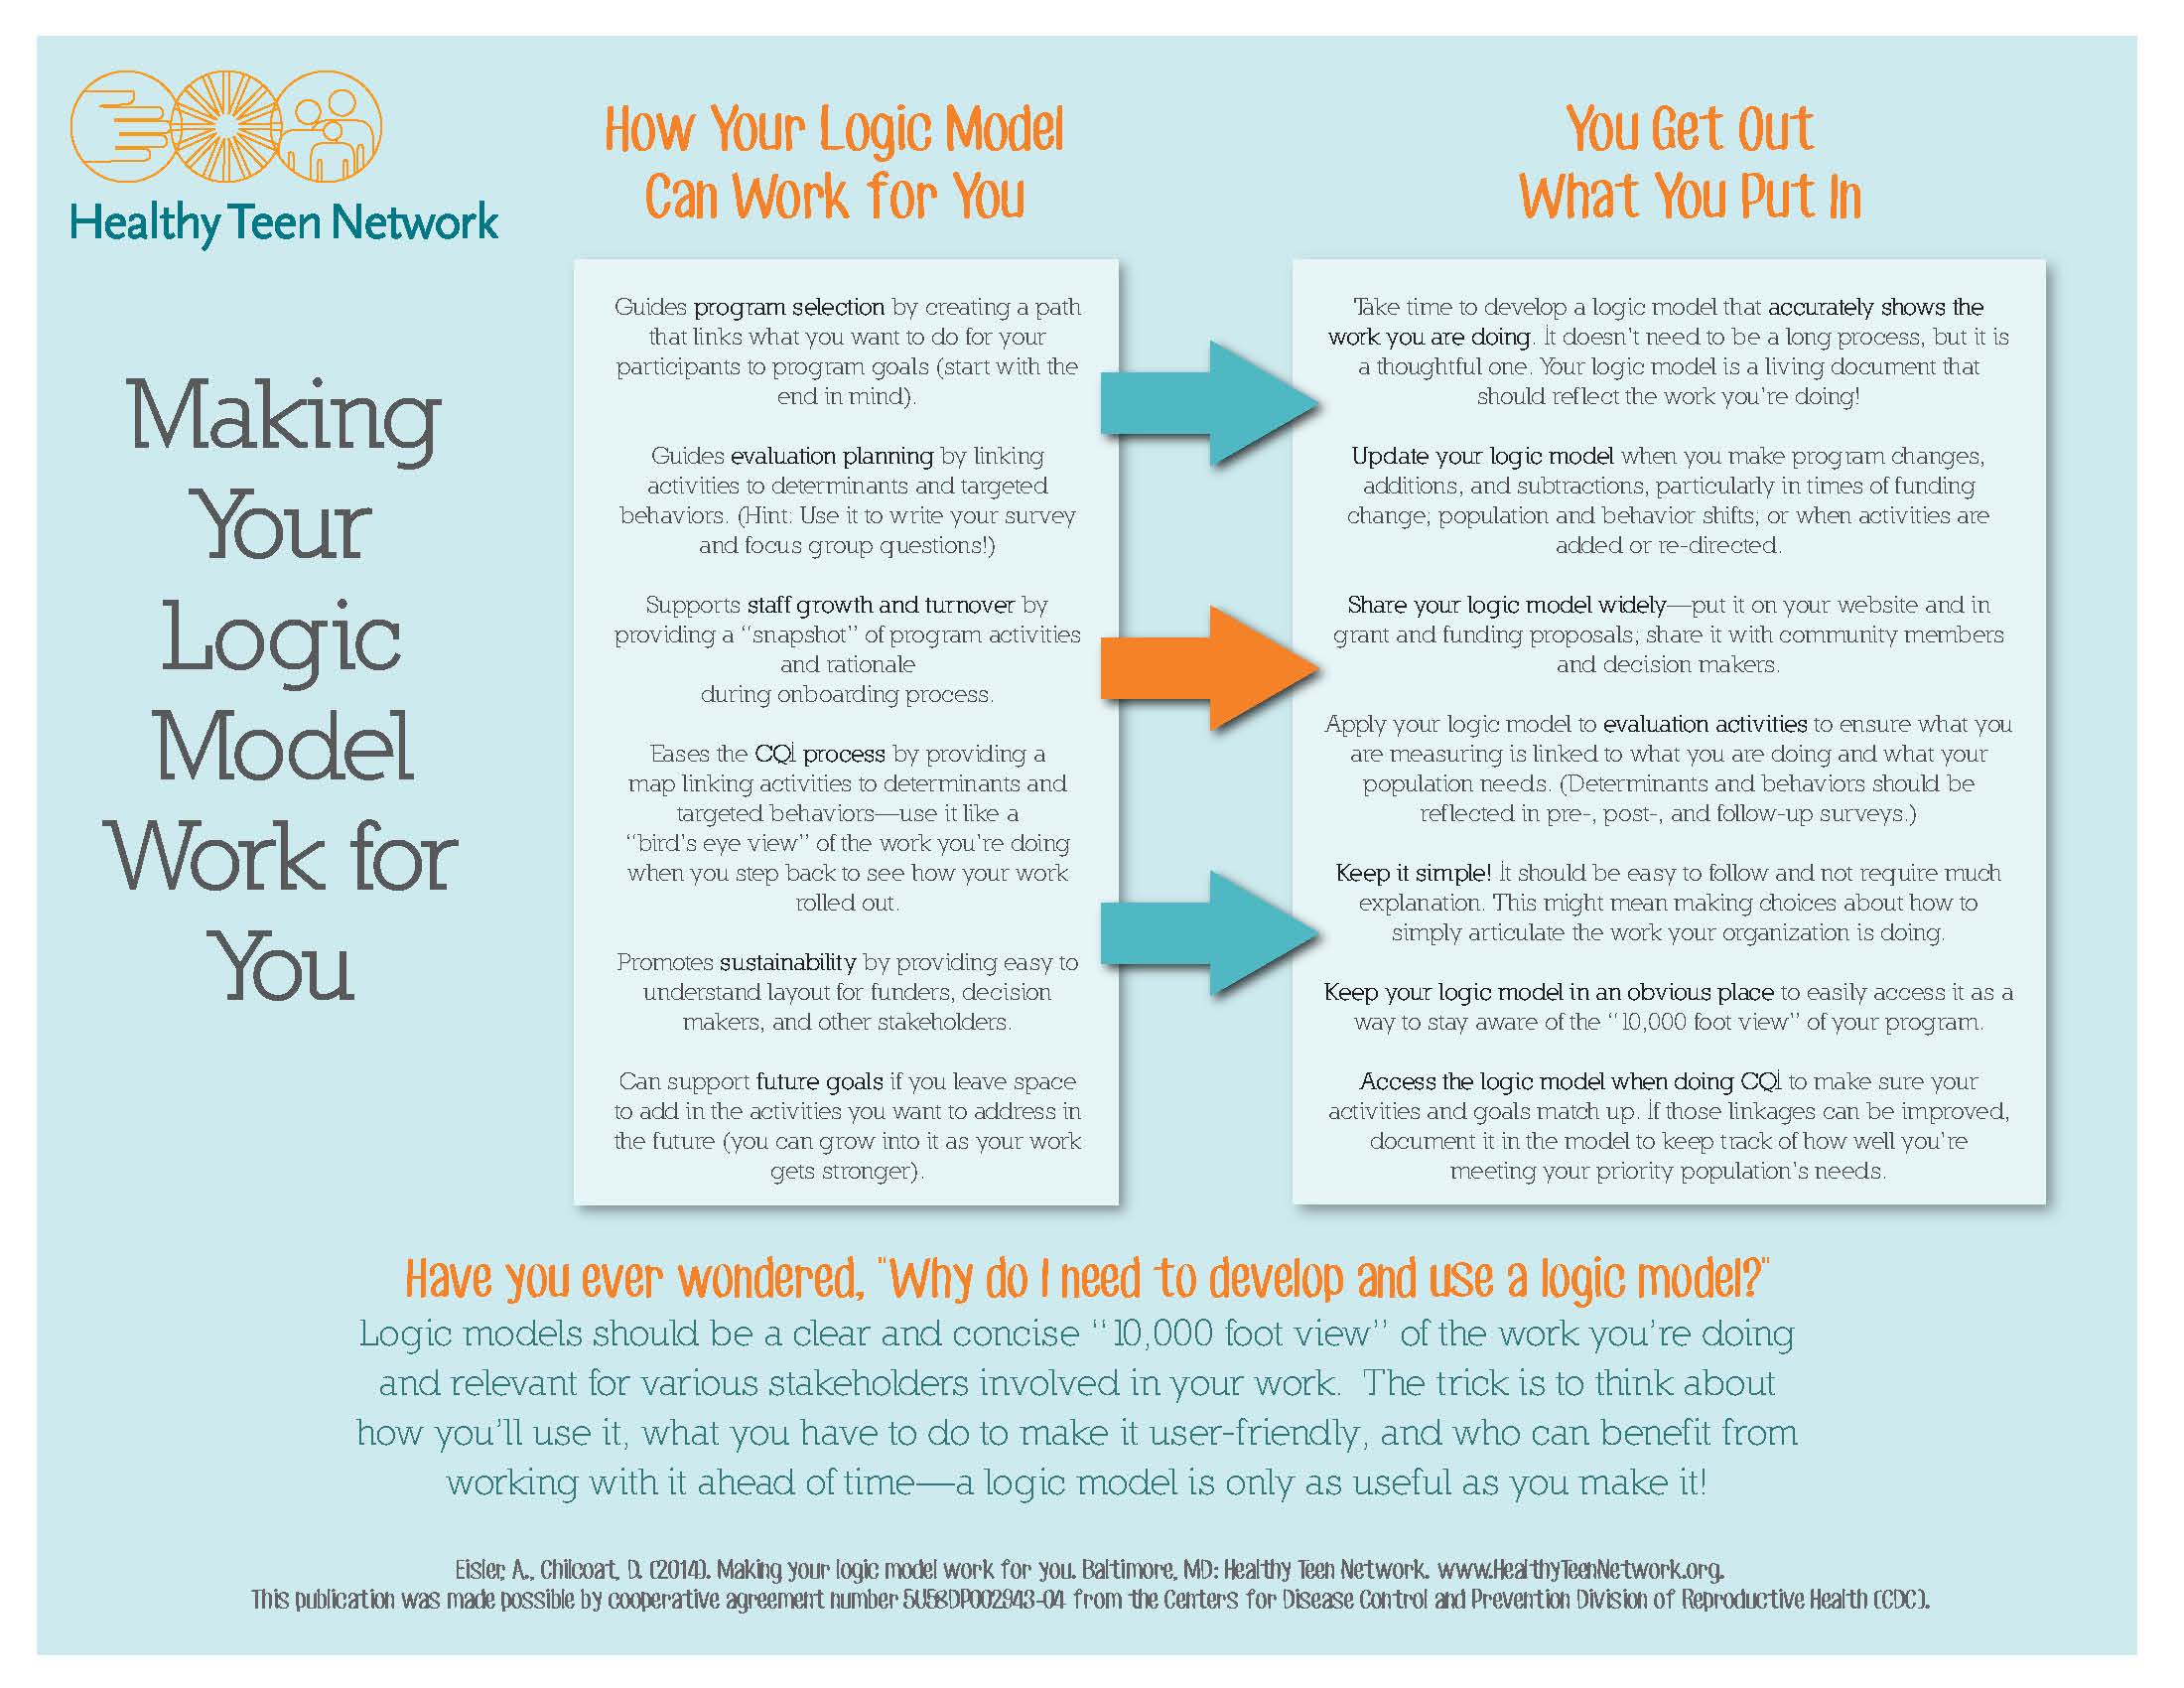 Cover image of making your logic model work for you tip sheet